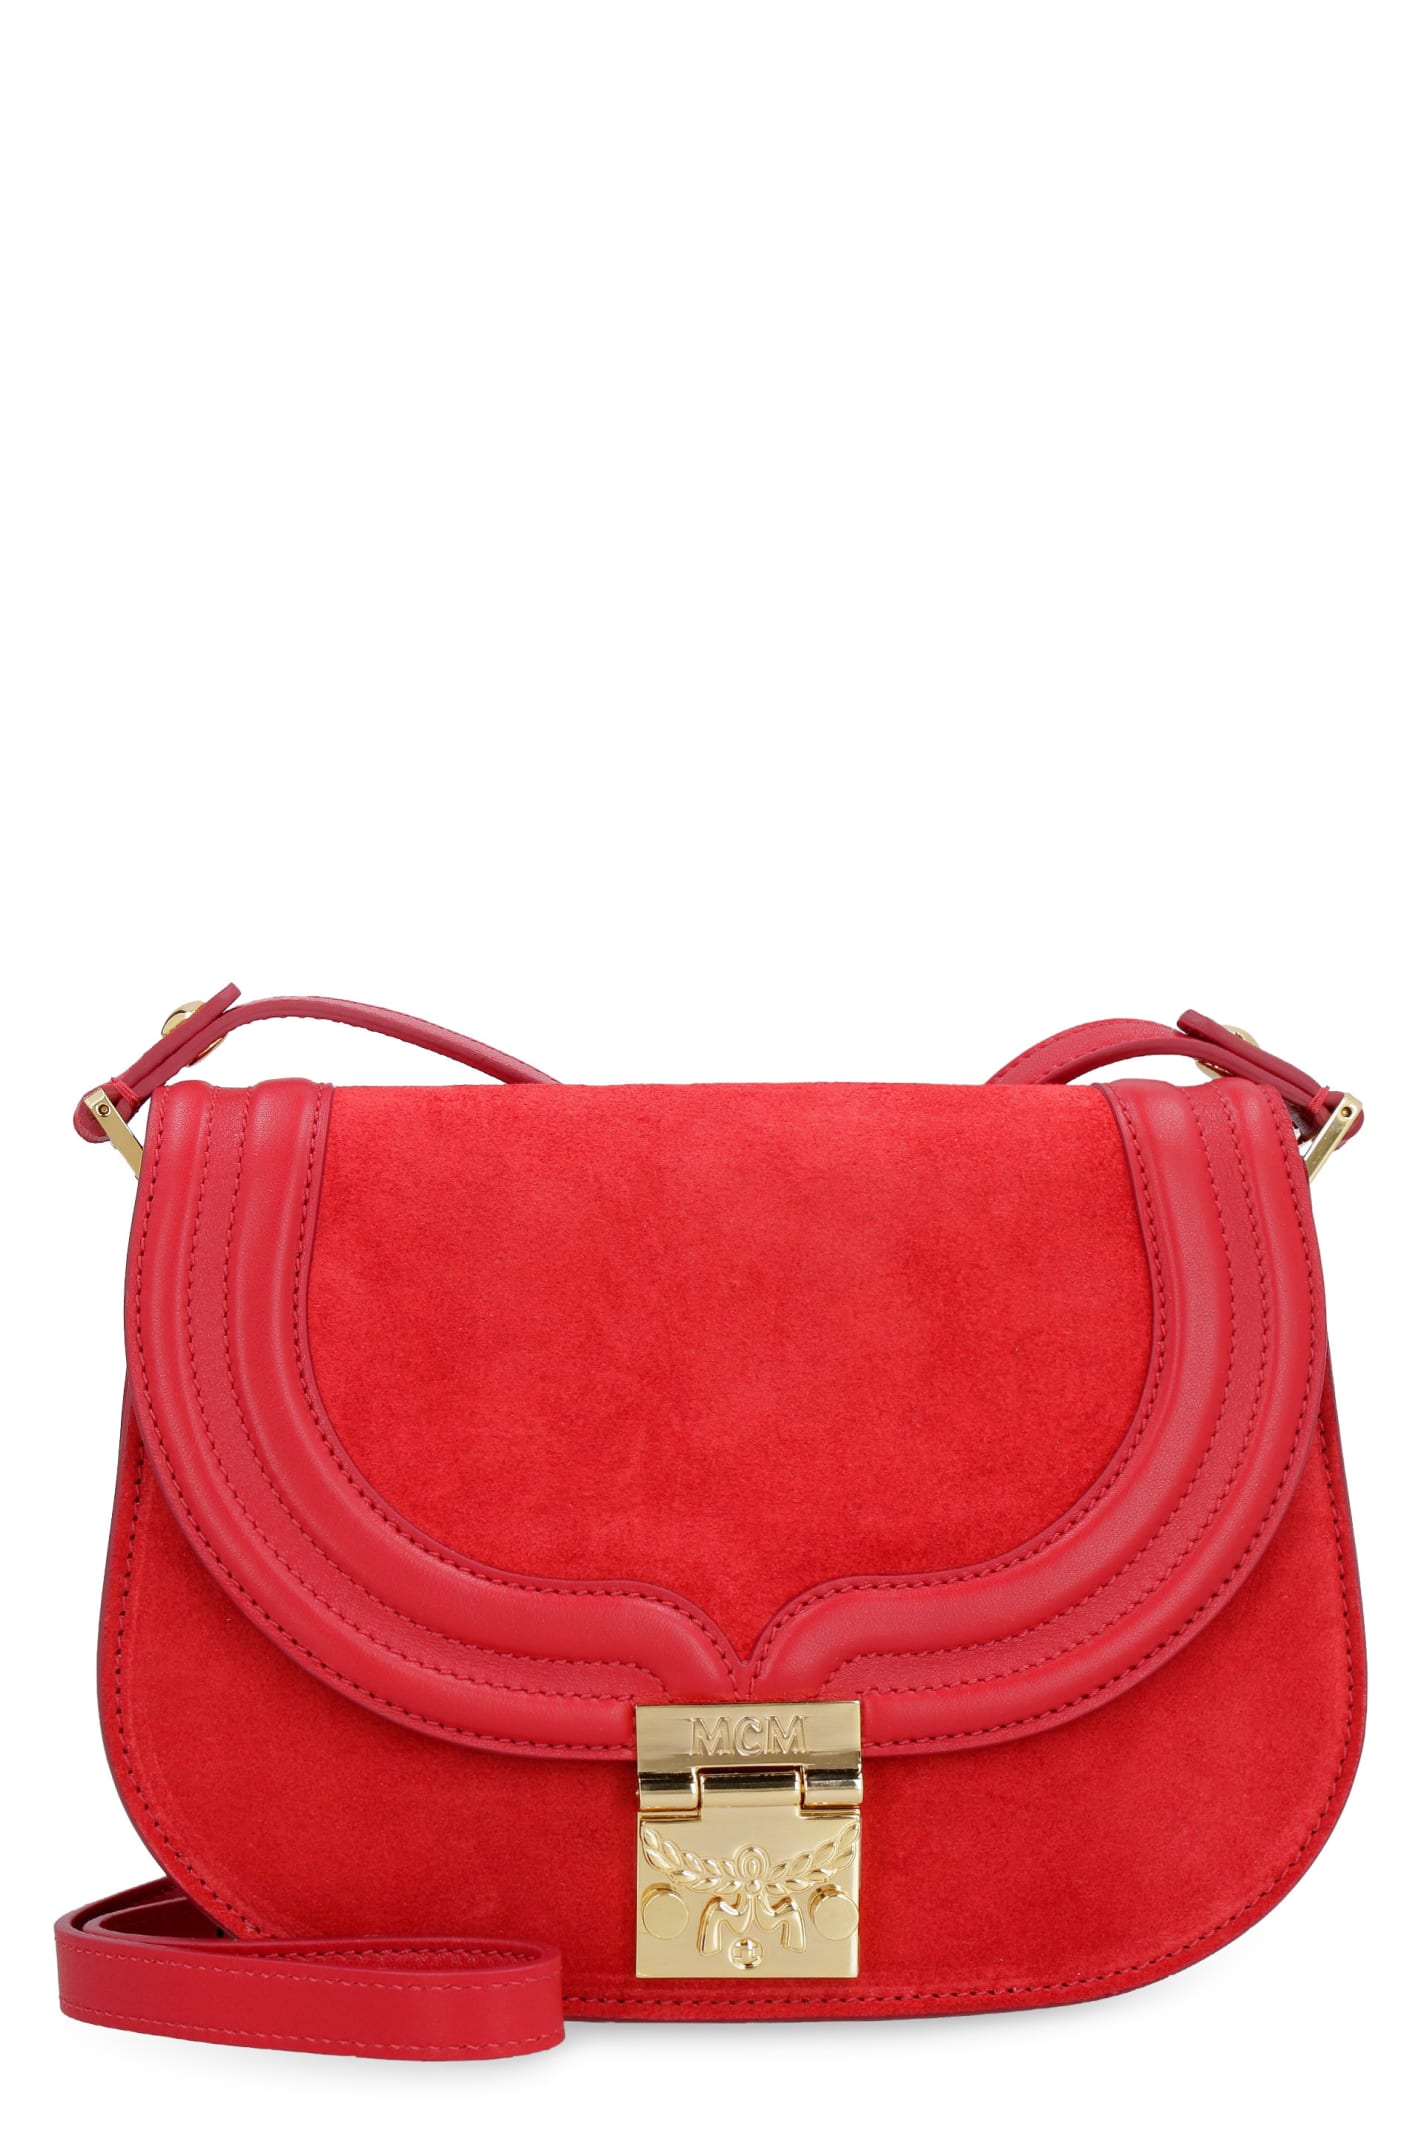 Mcm Leather And Suede Crossbody Bag In Red | ModeSens